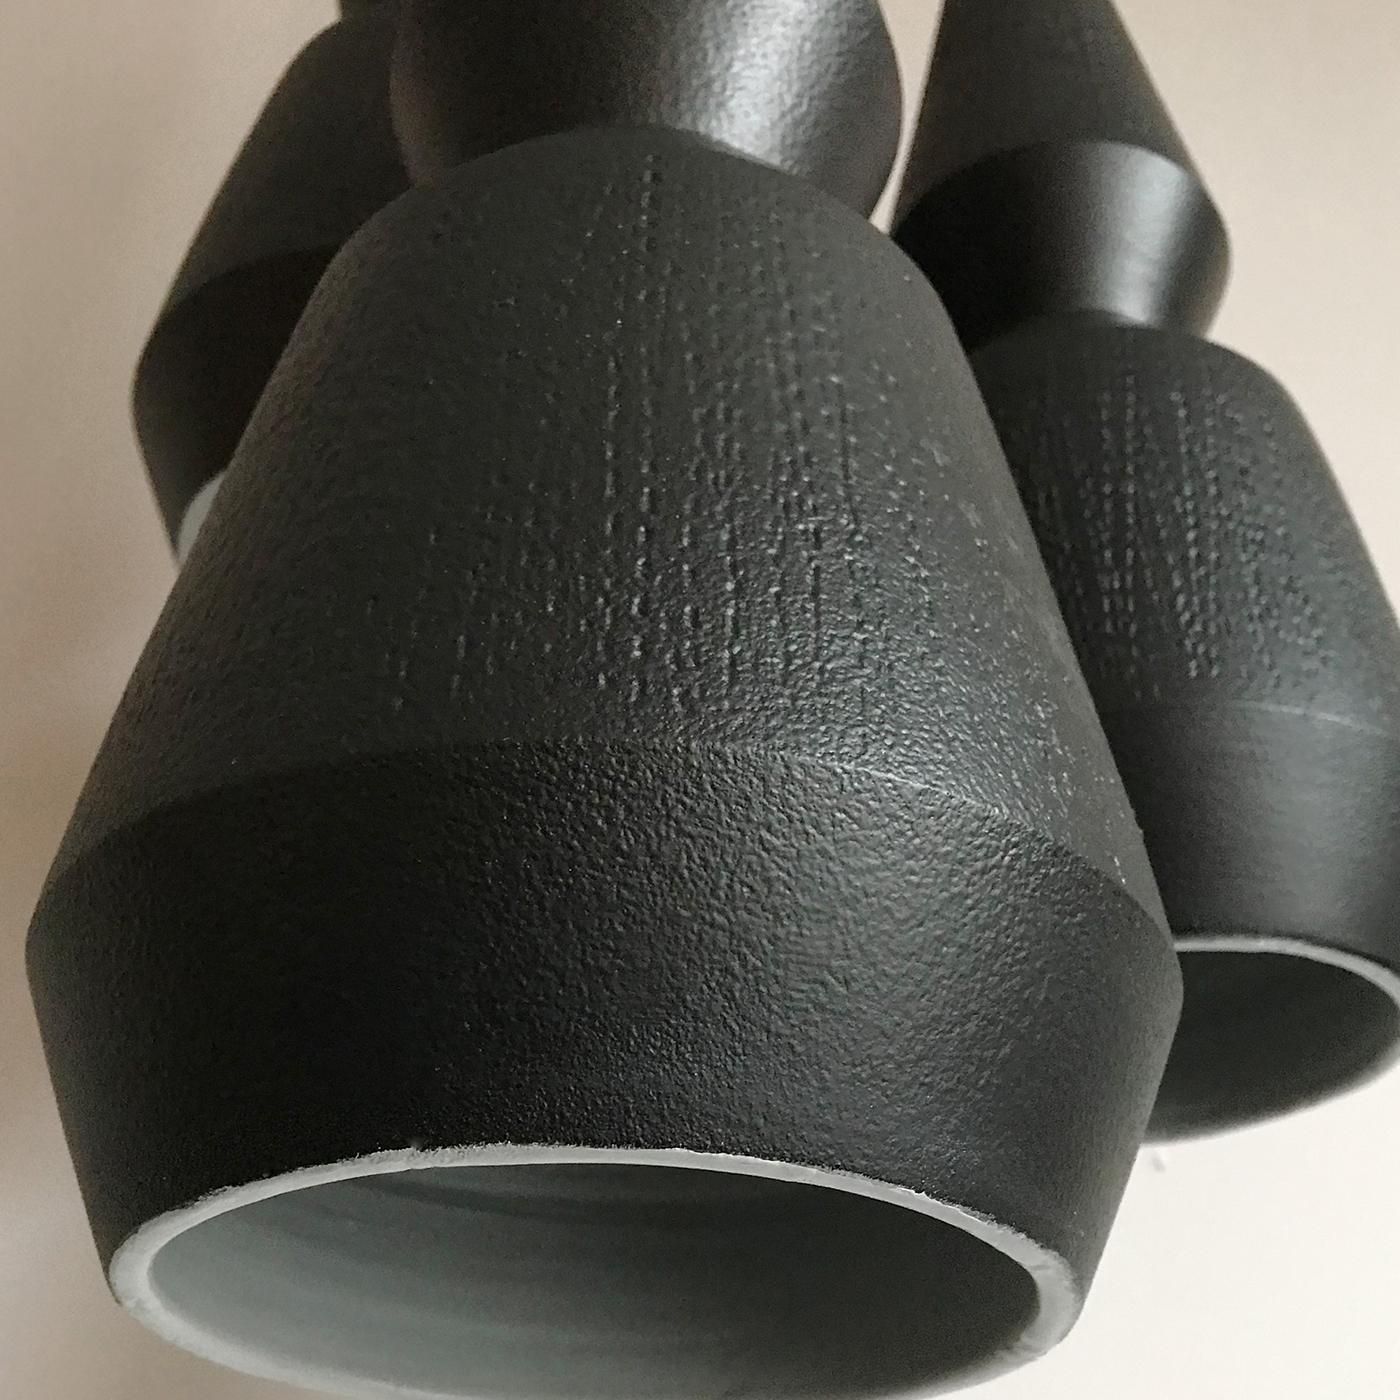 Worked on a lathe by hand, this set of three pendant lamps is a superb example of traditional craftsmanship in an authentically modern design. Each pendant is a sculptural work of art made of ceramic with a matte black-lacquered finish, enriched